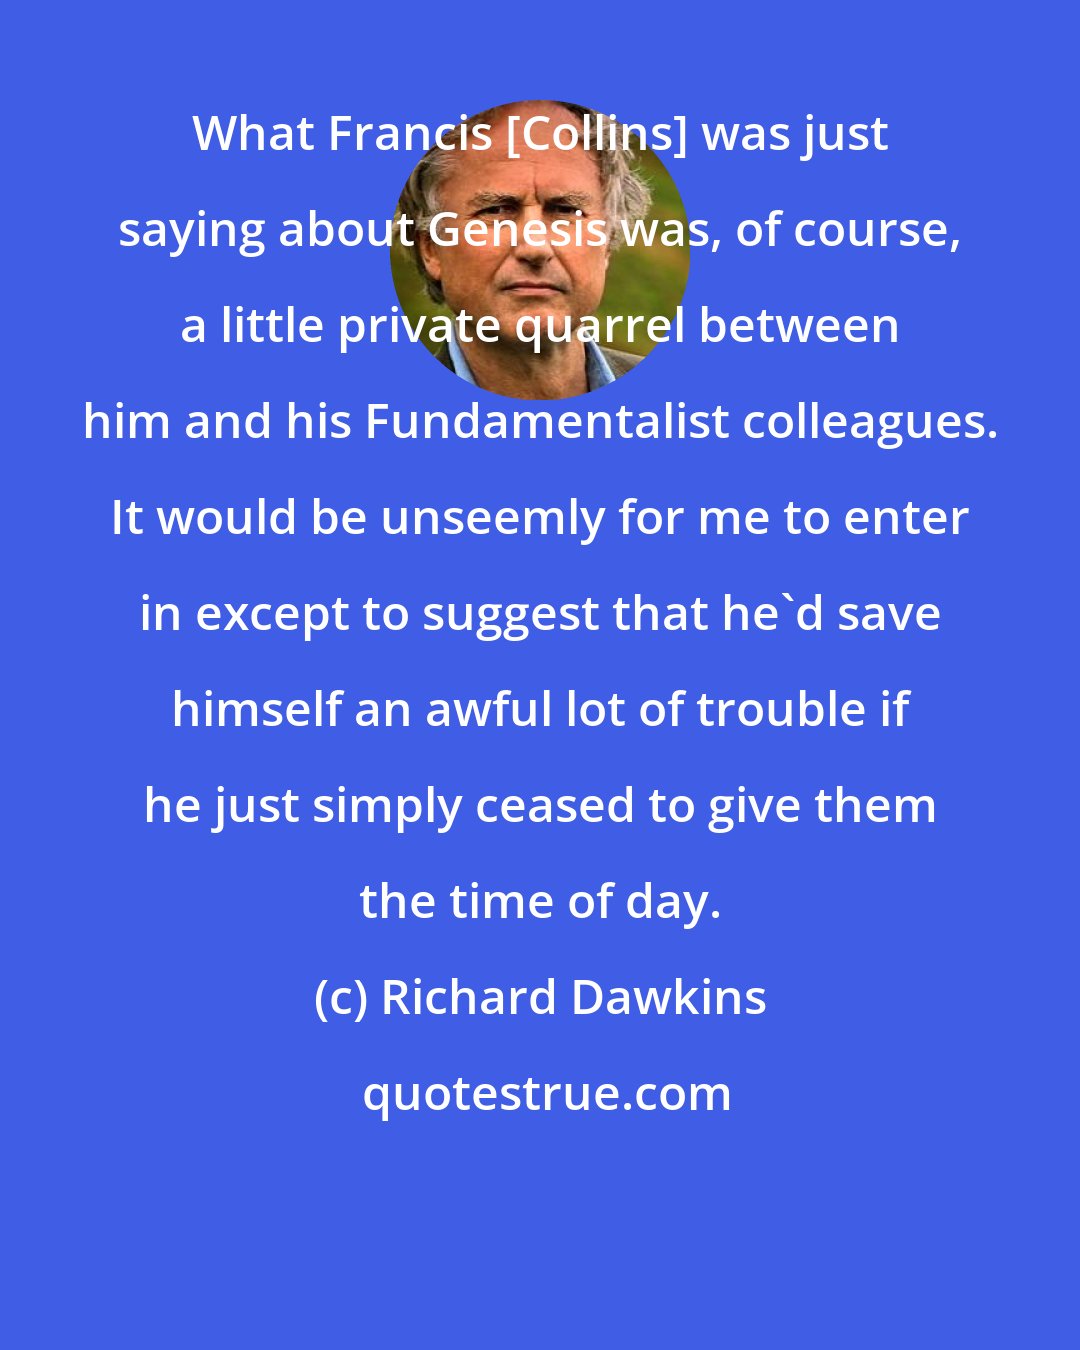 Richard Dawkins: What Francis [Collins] was just saying about Genesis was, of course, a little private quarrel between him and his Fundamentalist colleagues. It would be unseemly for me to enter in except to suggest that he'd save himself an awful lot of trouble if he just simply ceased to give them the time of day.